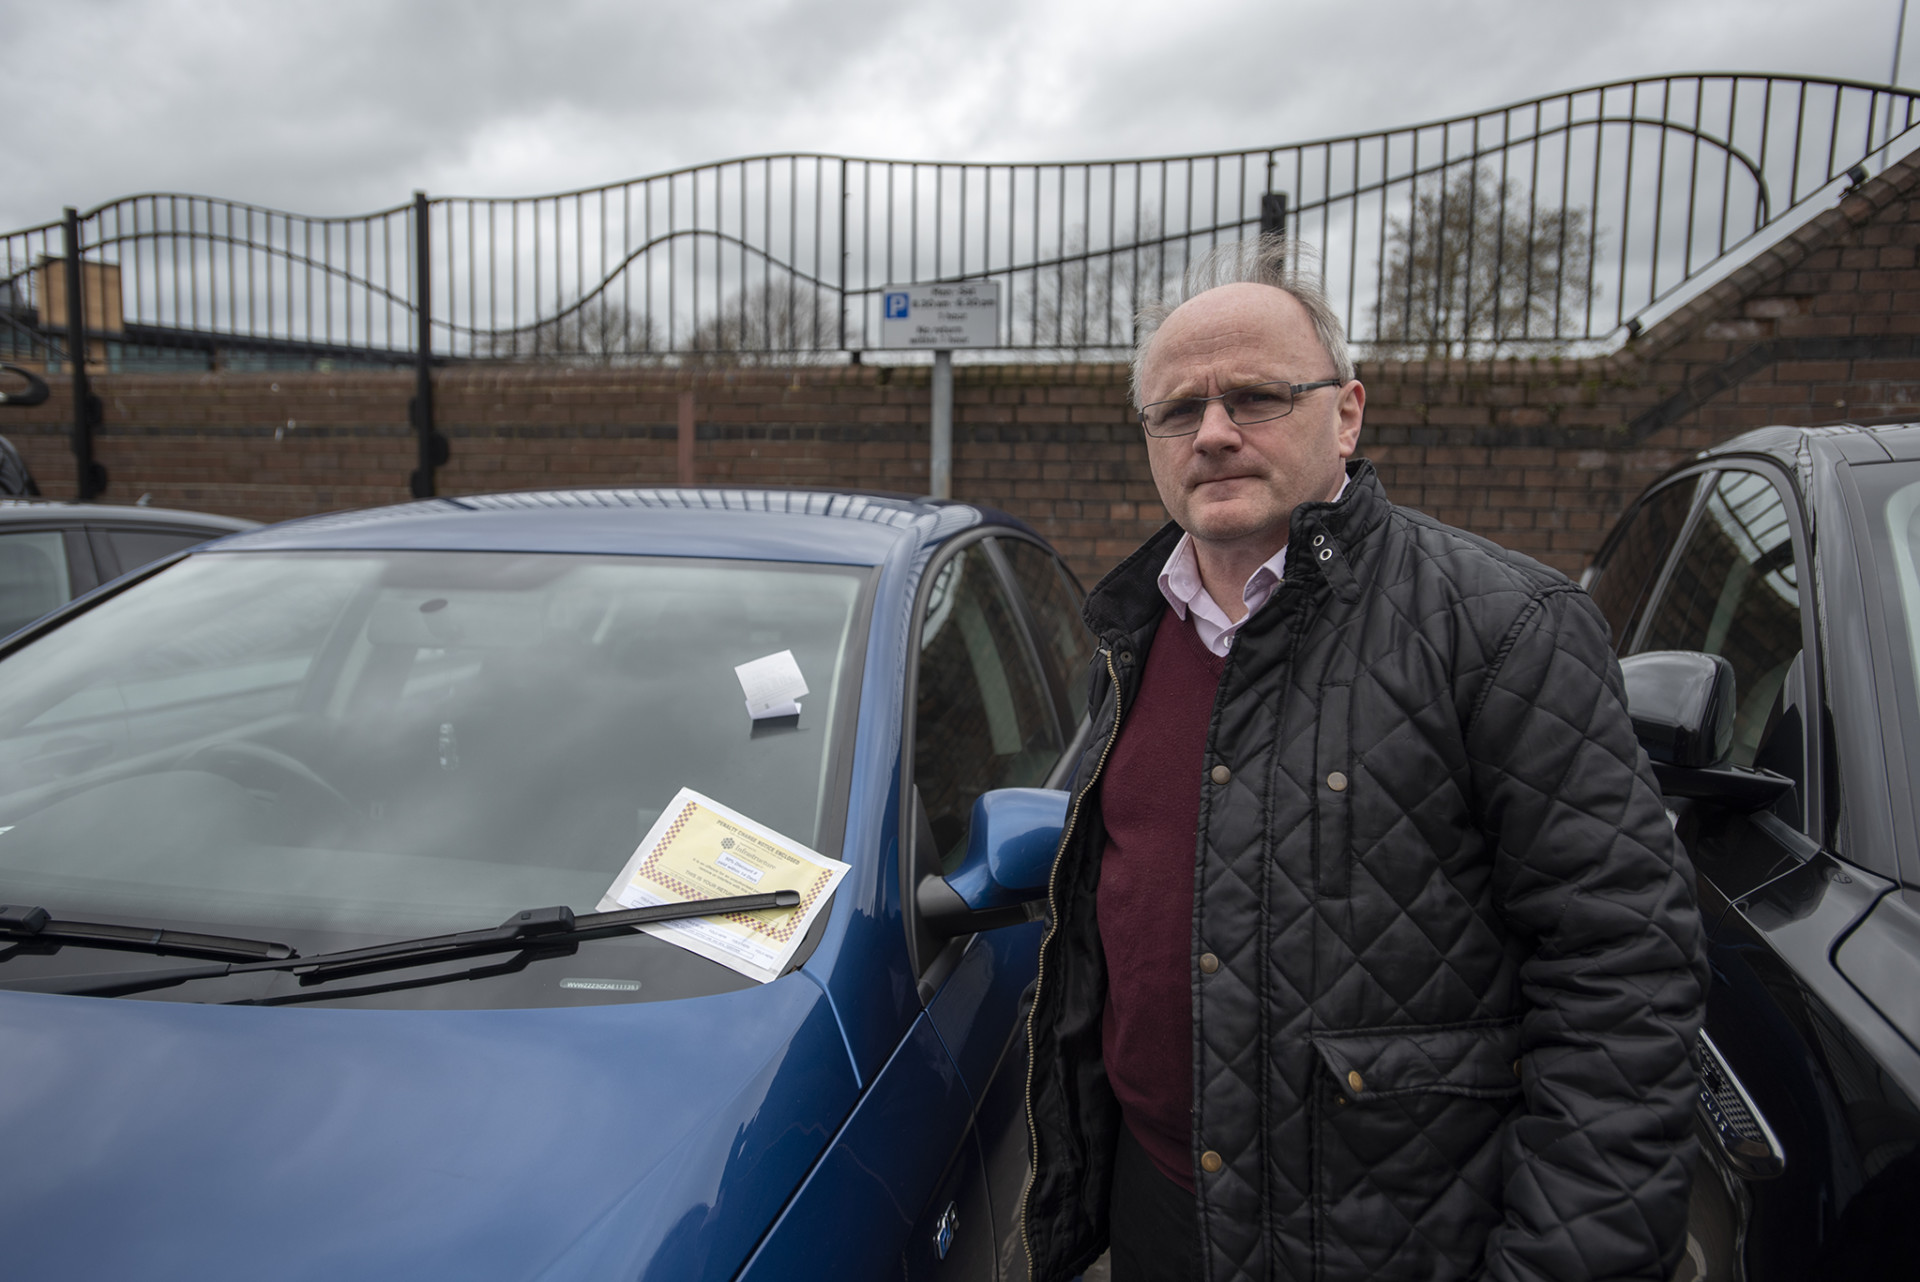 Moratorium on fines caused by car park confusion ‘unlikely’, council told